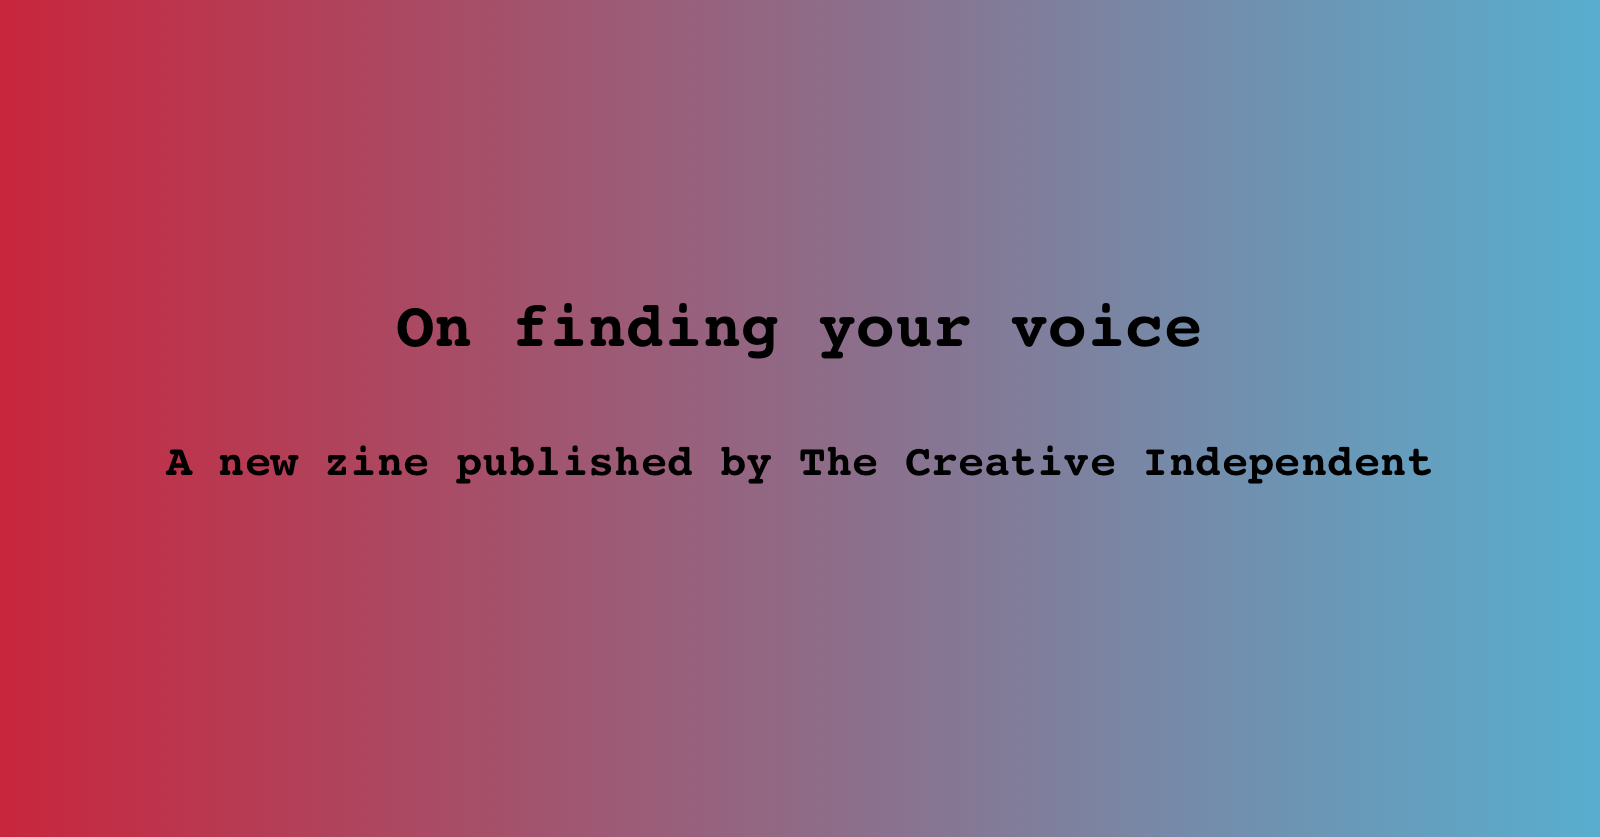 IndieWire – Page 9212 – The Voice of Creative Independence